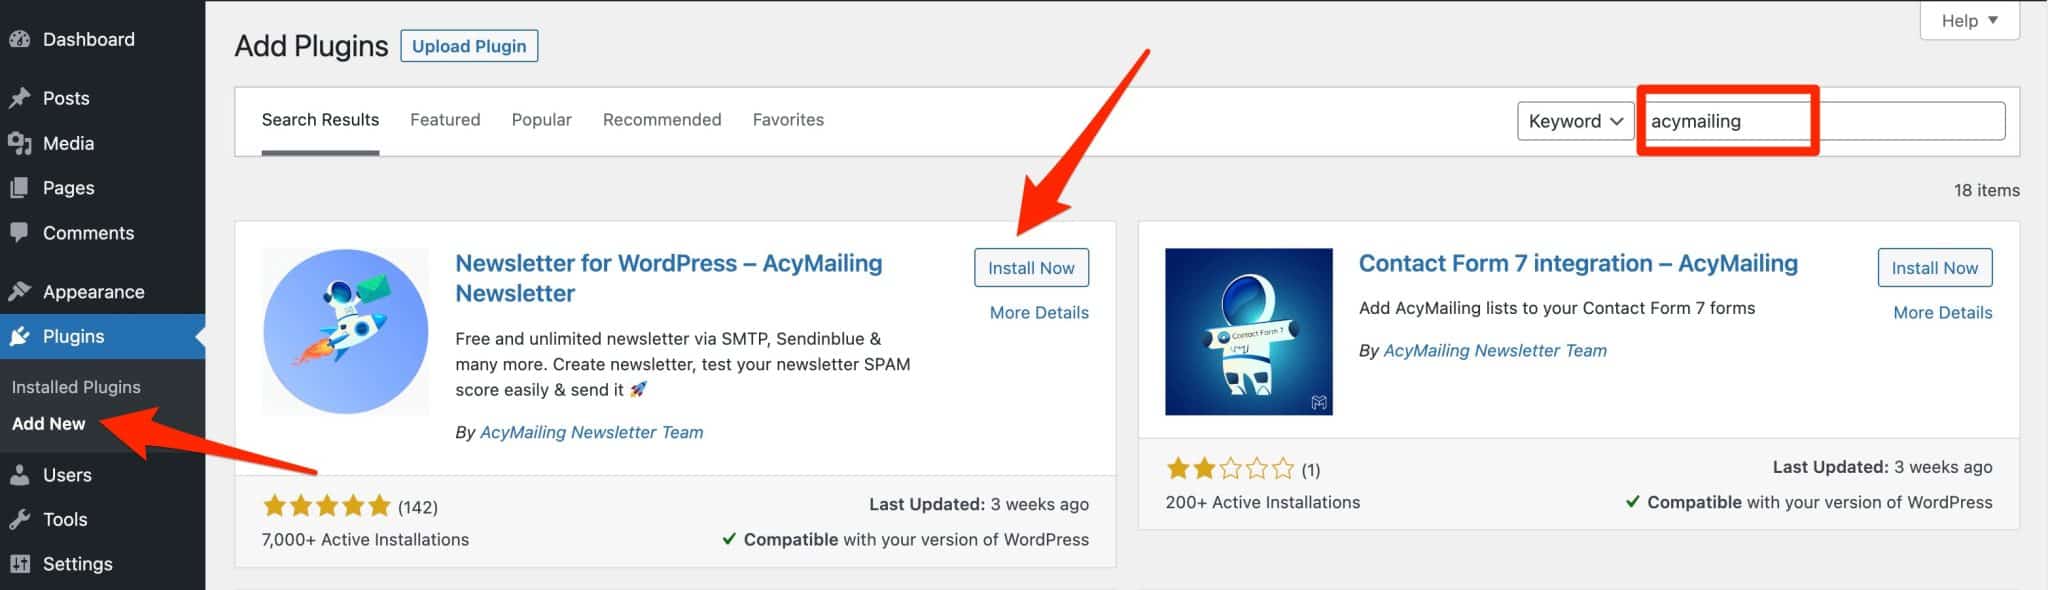 Installation of the WordPress plugin AcyMailing in the back office.